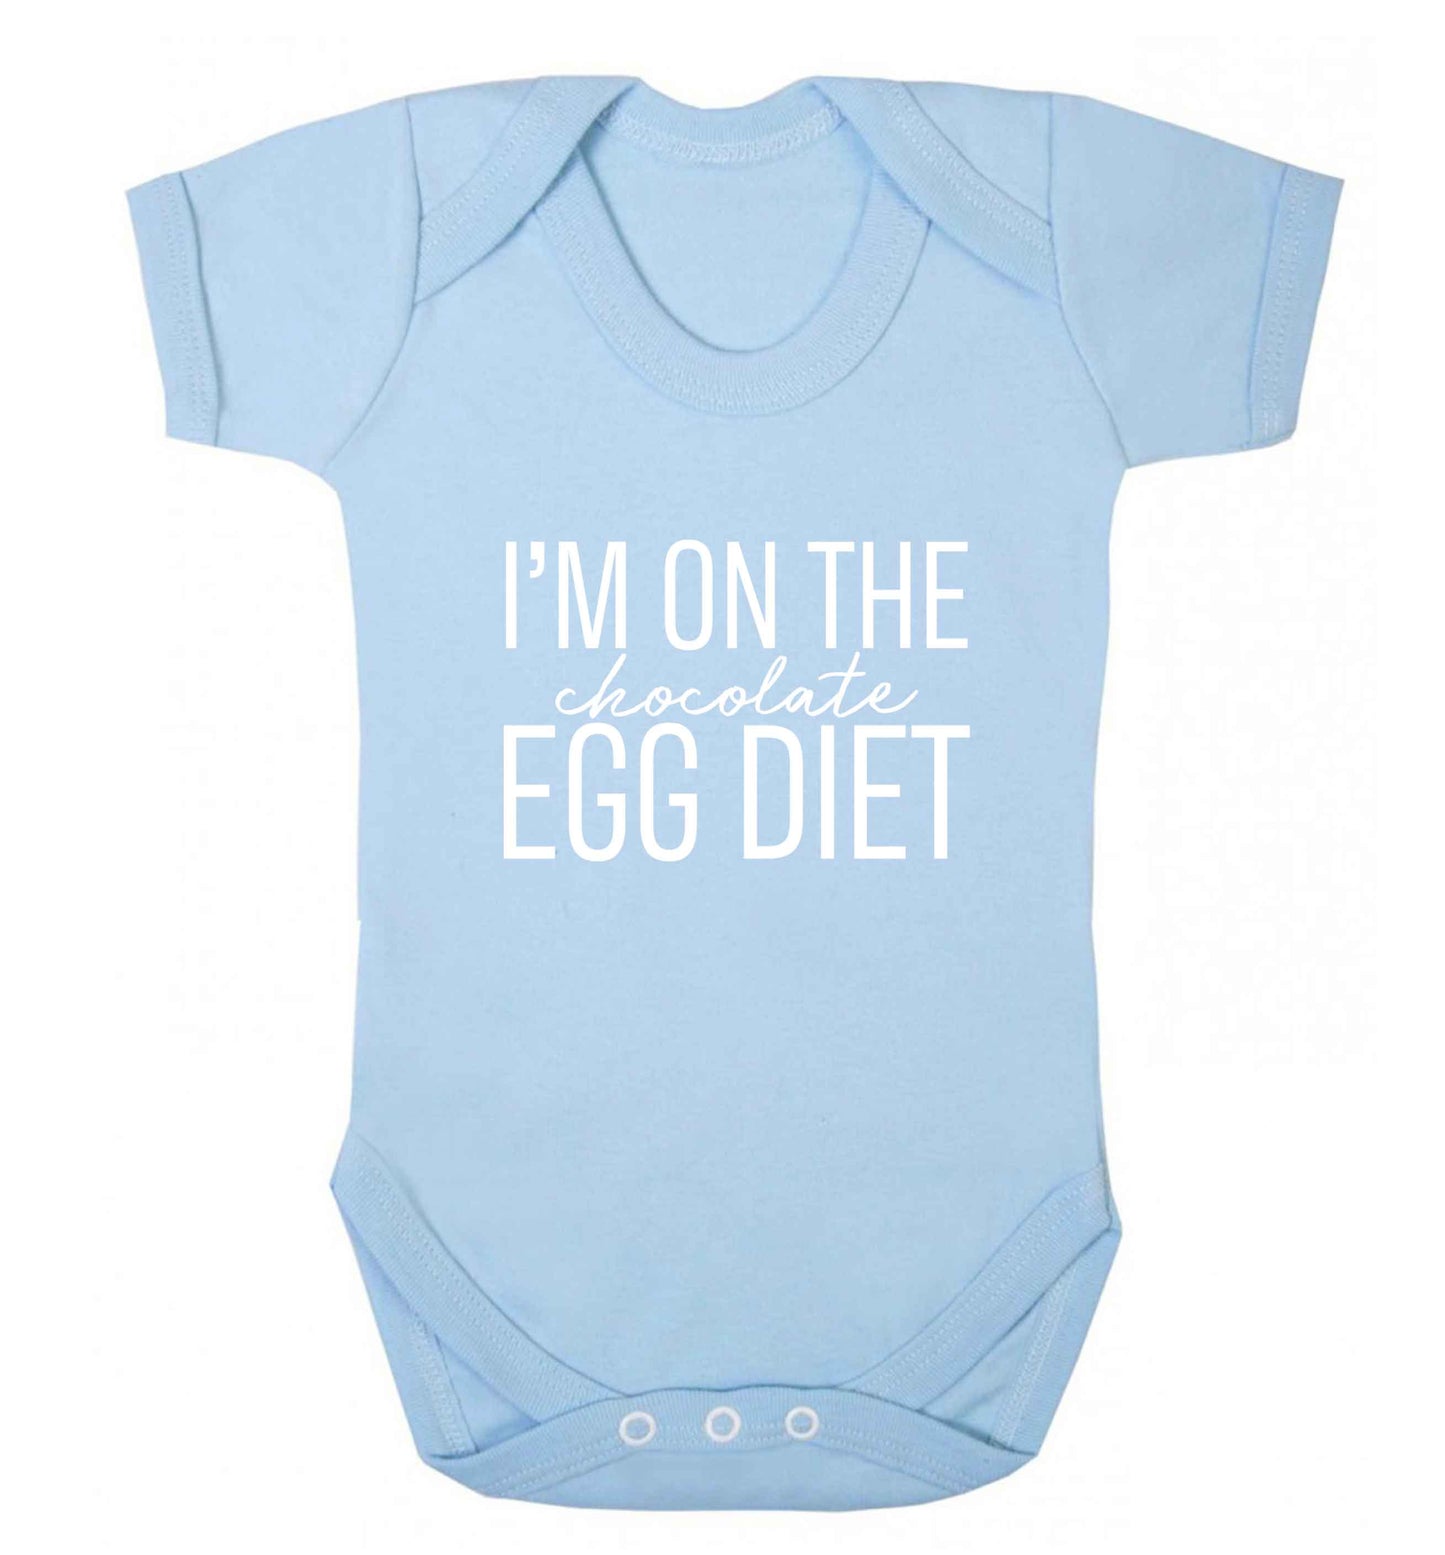 I'm on the chocolate egg diet baby vest pale blue 18-24 months